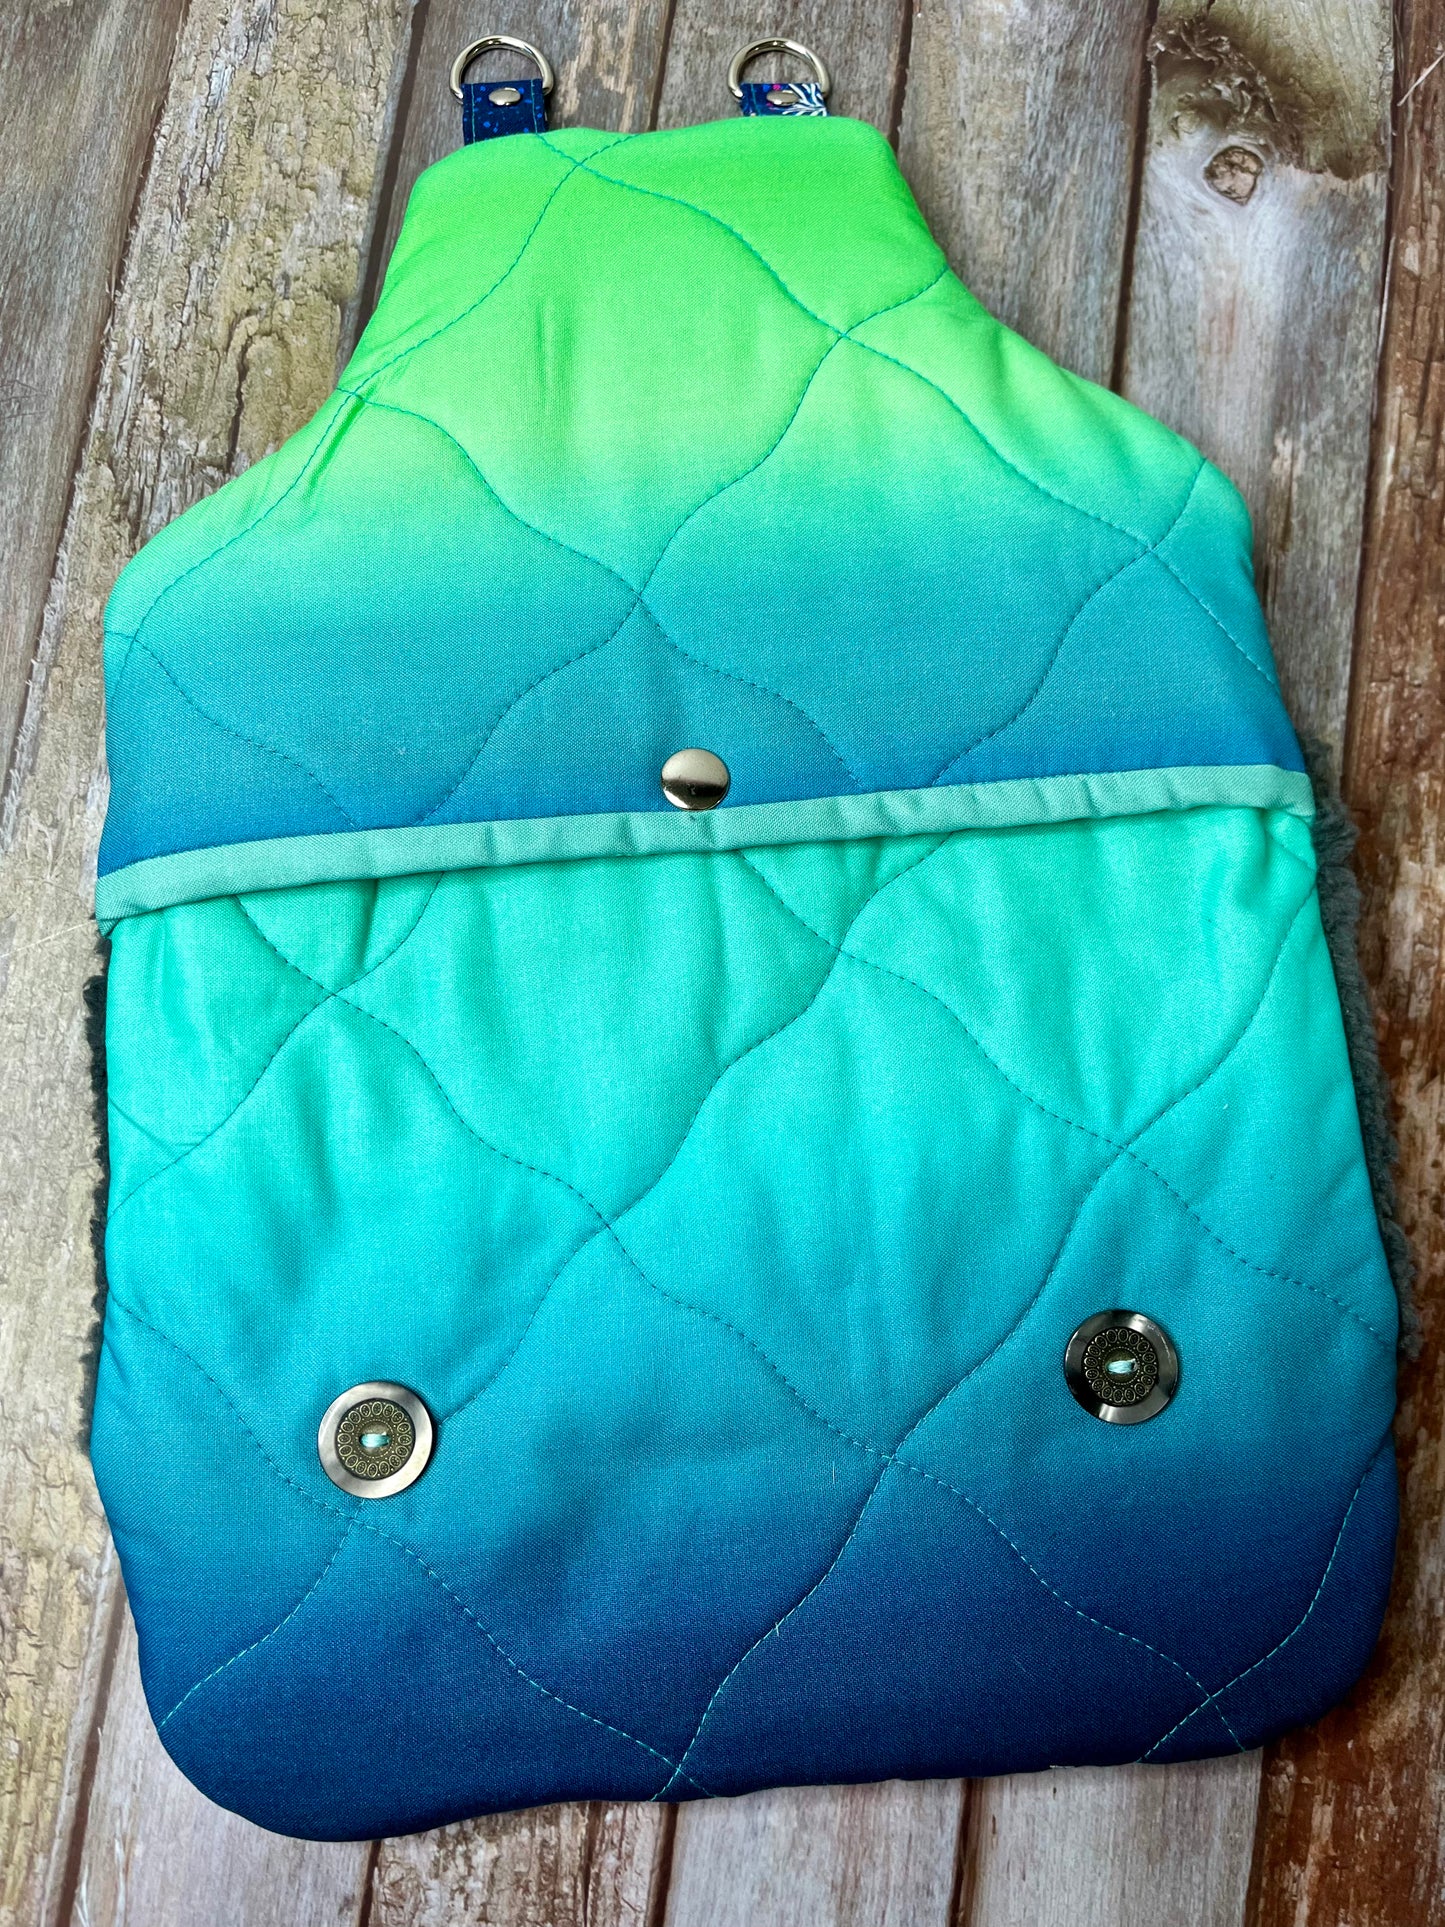 Wearable Hot Water Bottle Cover - Under the sea aurora - Uphouse Crafts